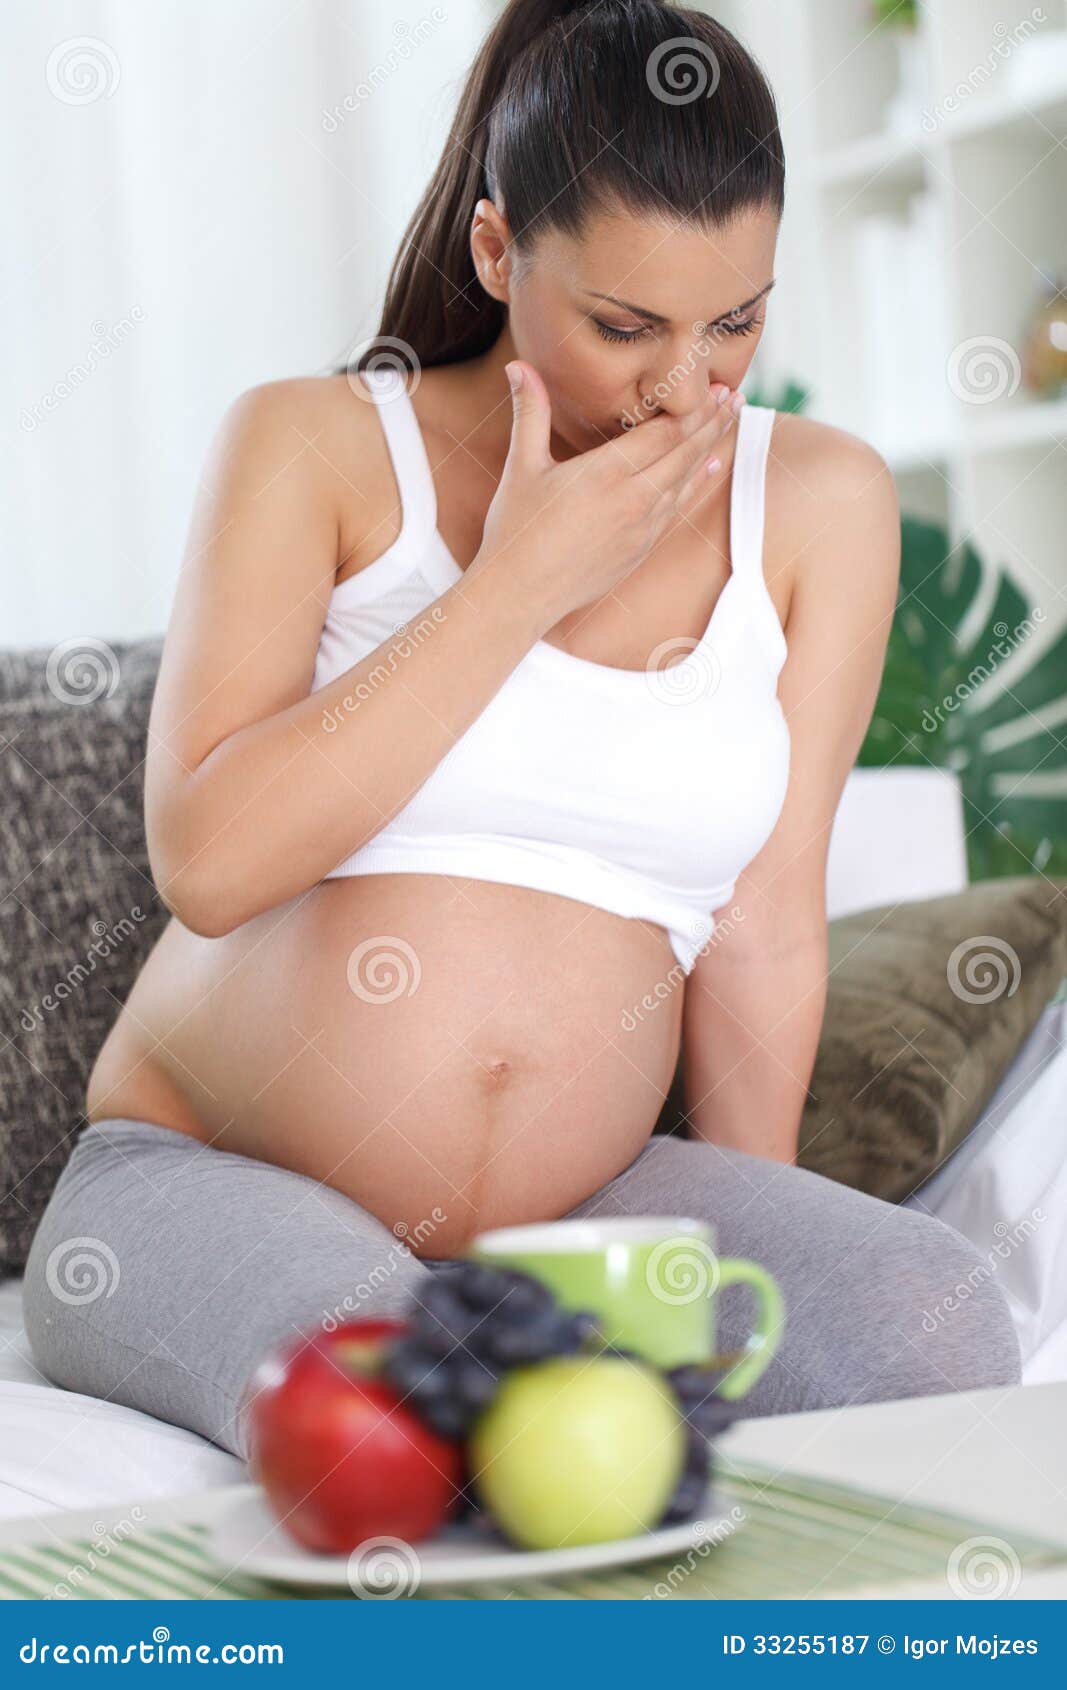 pregnancy and nausea